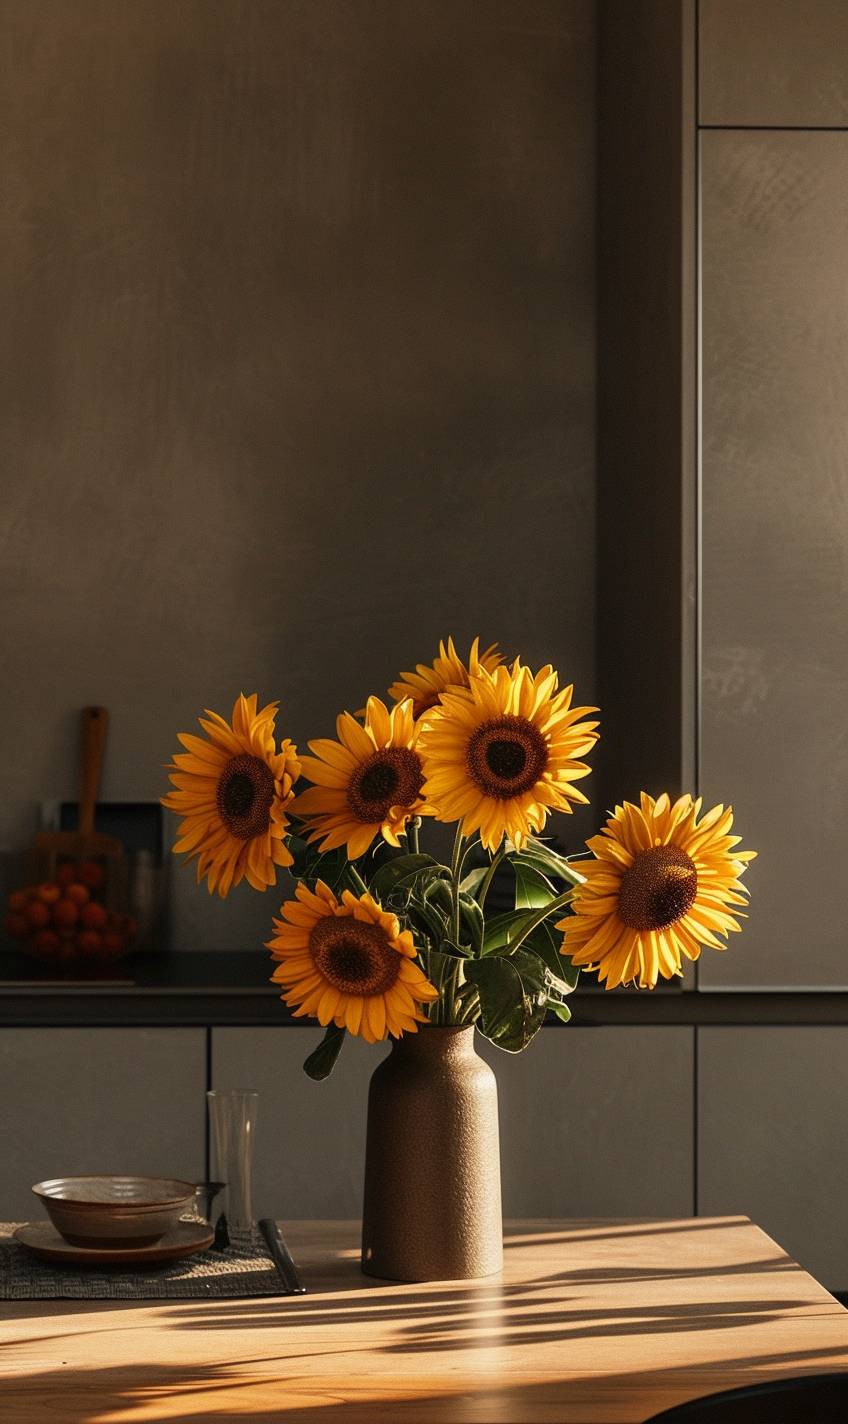 A photorealistic photo taken with a high quality camera of a beautiful still life arrangement featuring a bouquet of sunflowers in a vase on a table in a modern apartment.